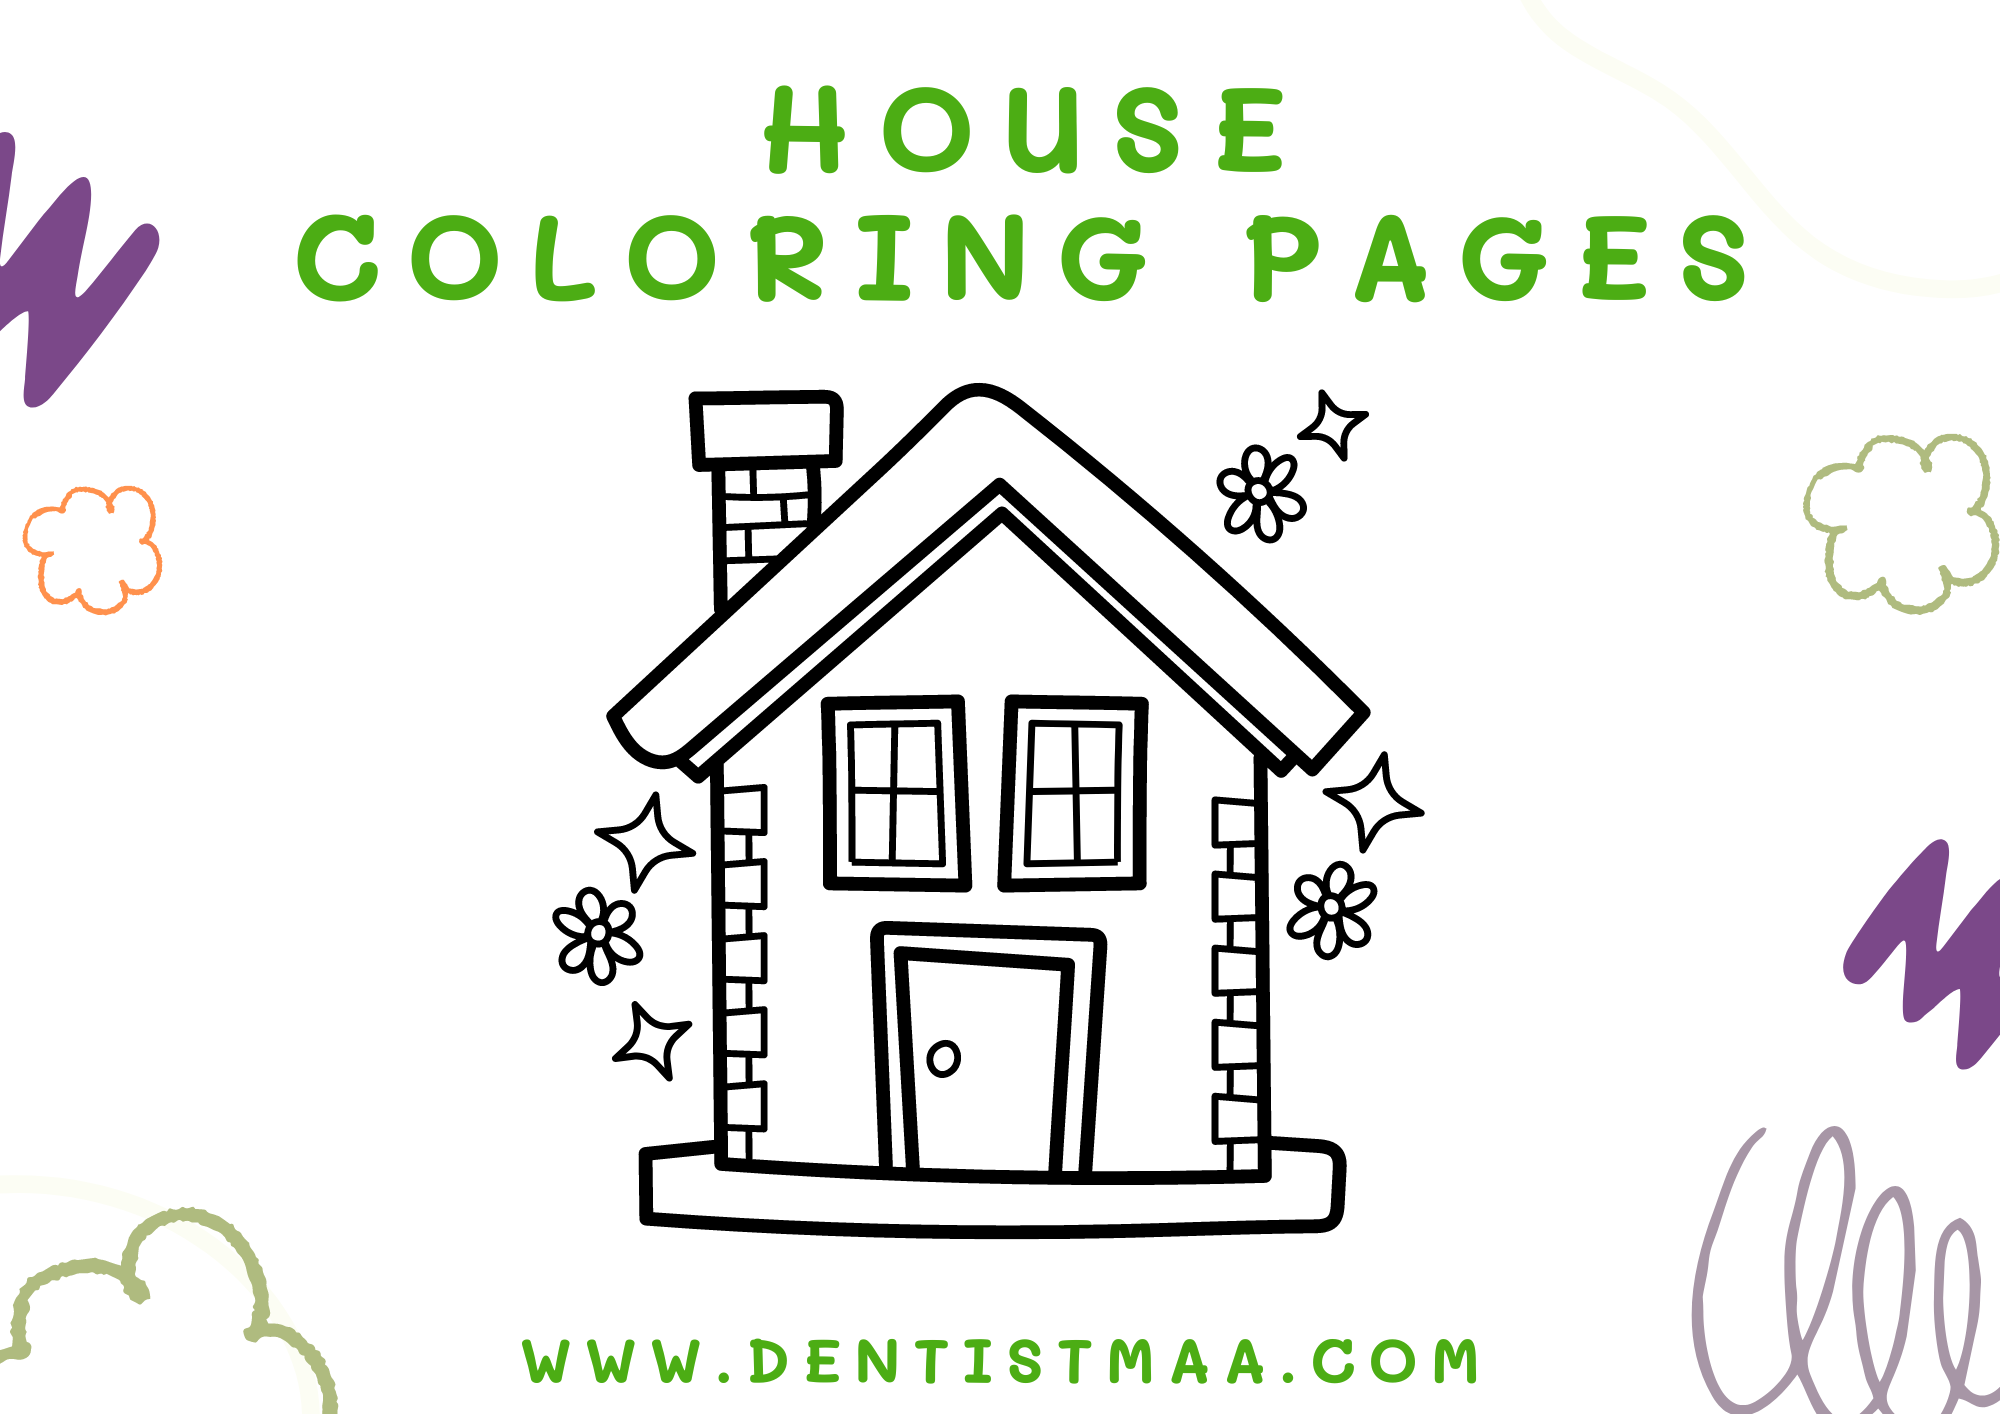 house coloring pages, coloring pages, coloring, house, home coloring pages